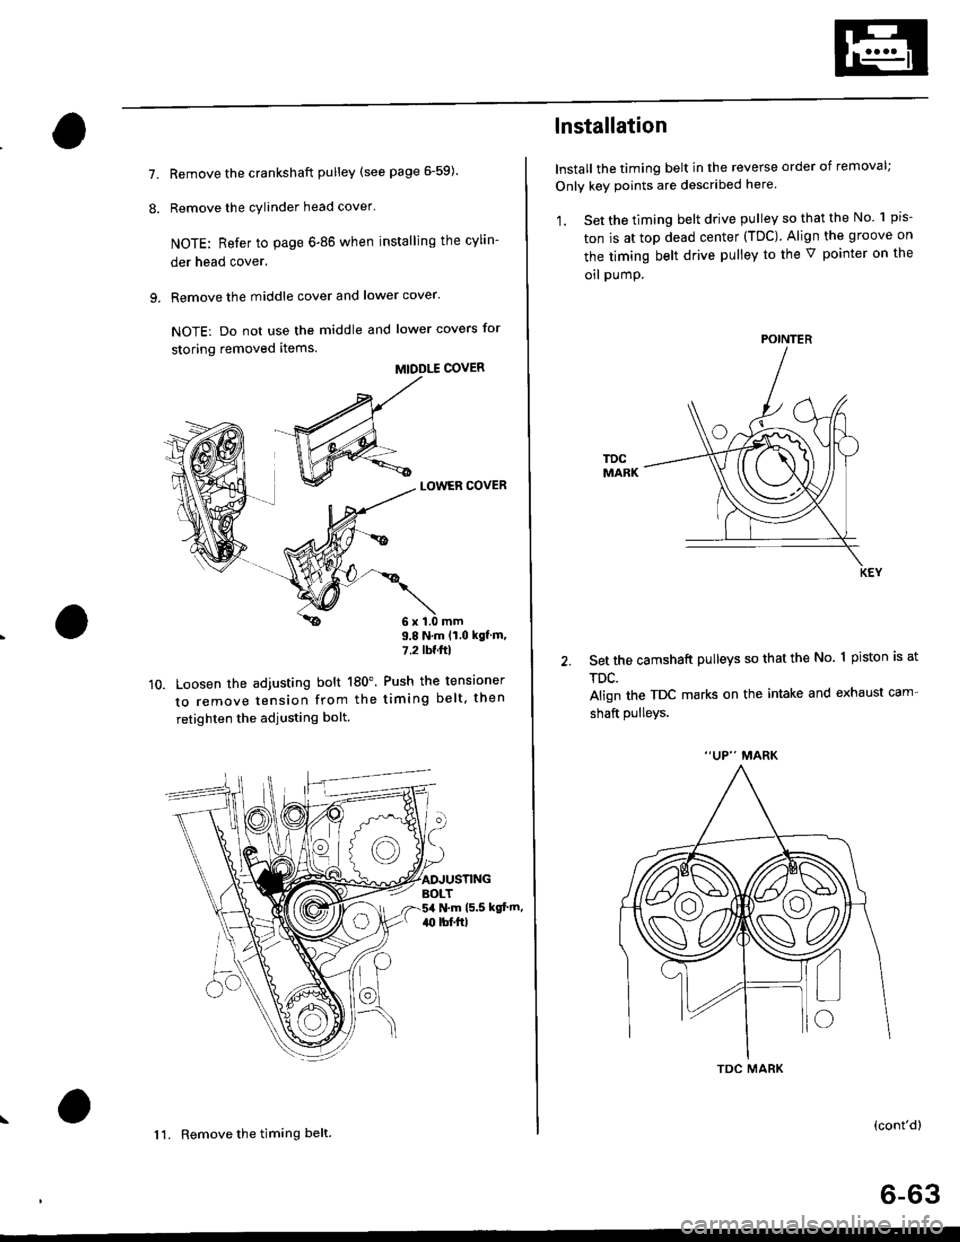 HONDA CIVIC 1999 6.G Workshop Manual 7.
8.
Remove the crankshaft pulley (see page 6-59).
Remove the cylinder head cover
NOTE: Refer to page 6-86 when installing the cylin-
der head cover.
Remove the middle cover and lower cover.
NOTE: D